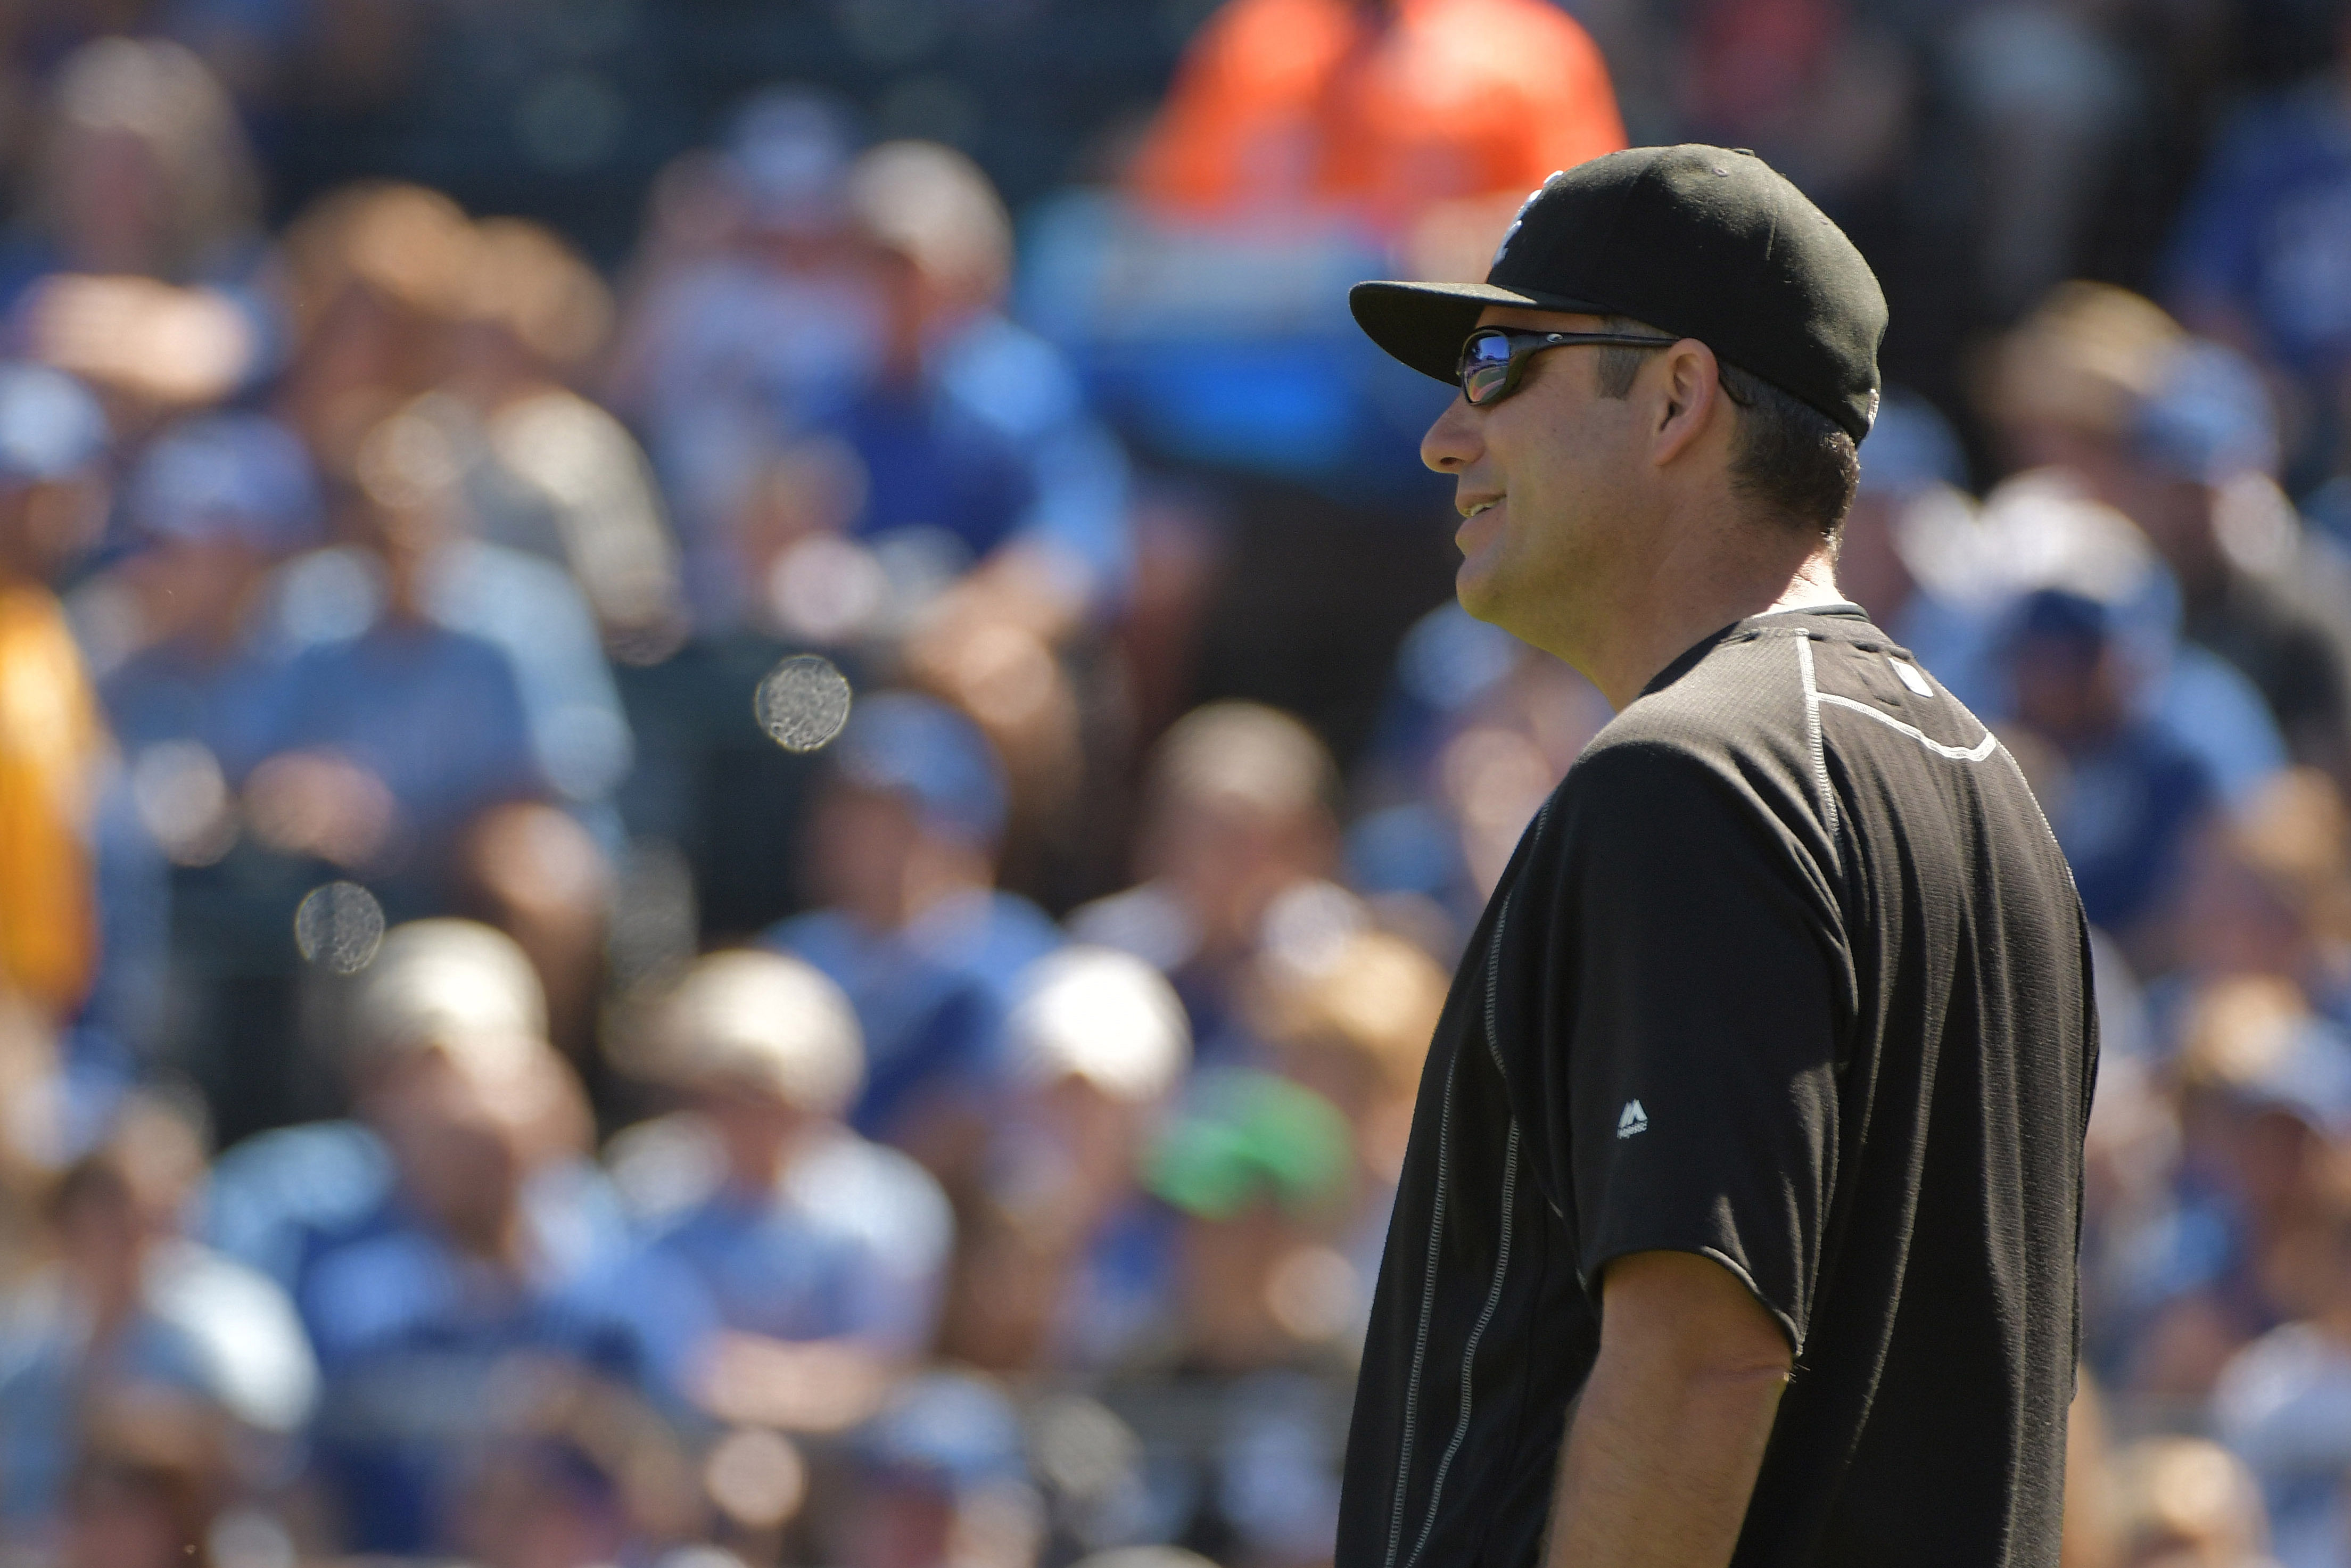 Shown here as a manager in 2016, Robin Ventura was a legendary college baseball star and winner of the 1988 Howser Trophy.